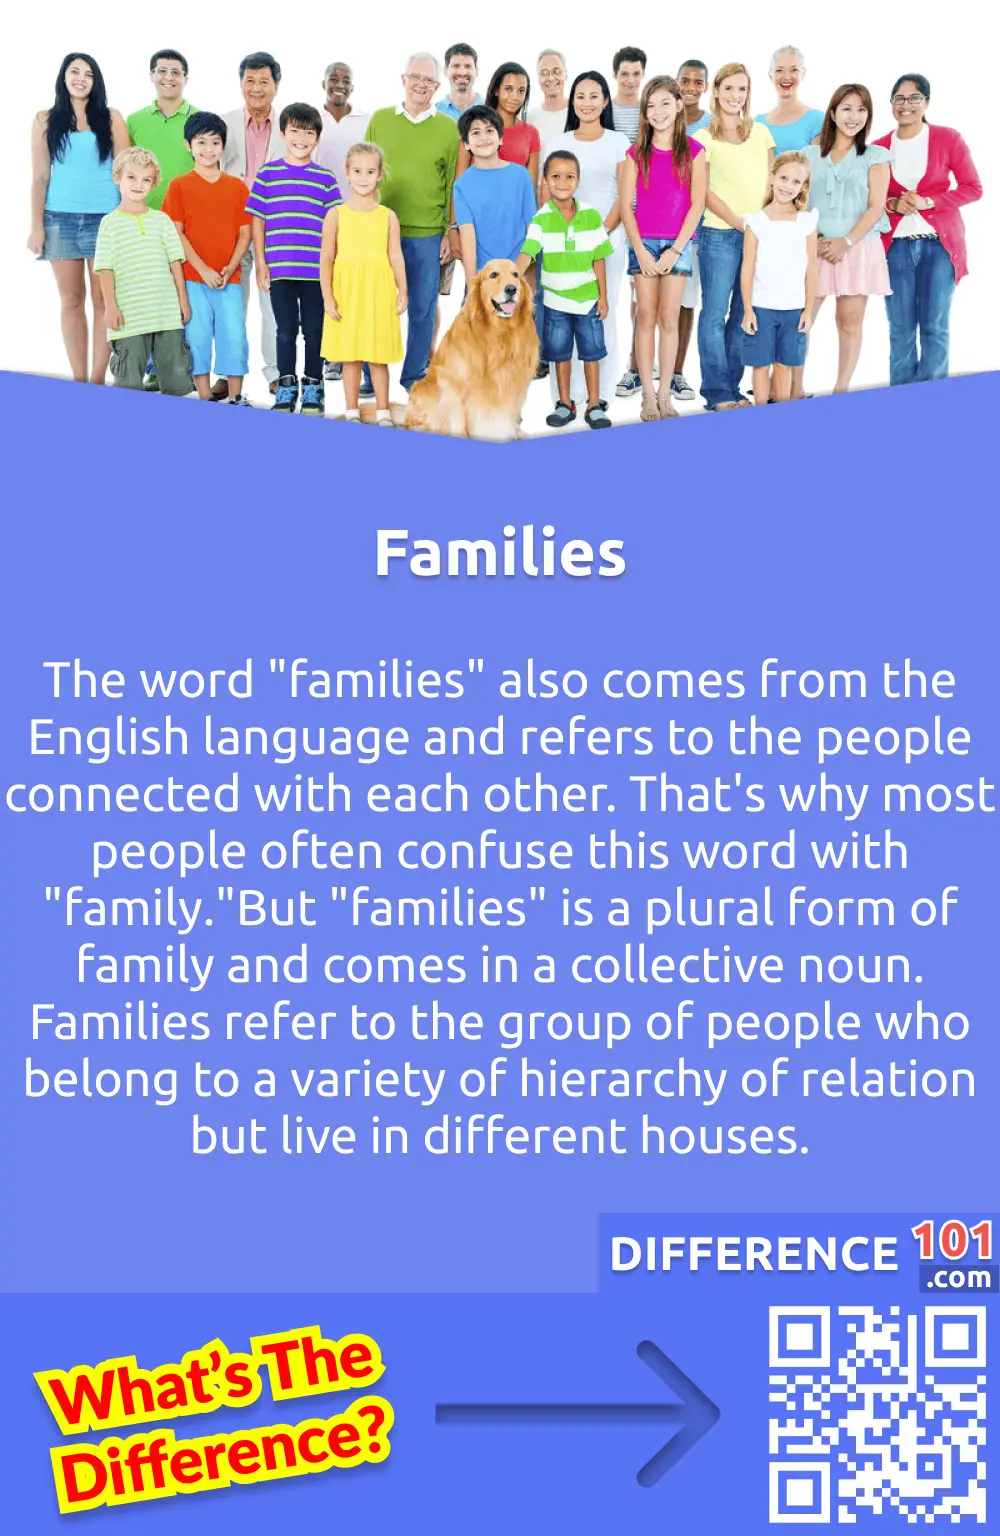 What are Families? The word "families" also comes from the English language and refers to the people connected with each other. That's why most people often confuse this word with "family."But "families" is a plural form of family and comes in a collective noun. Families refer to the group of people who belong to a variety of hierarchy of relation but live in different houses. For example, there is a family of James and another family of a different person named Stephen. So for these two groups of people, we will use the term "families ."These groups of people are separately known as a family, but collectively we call these families.